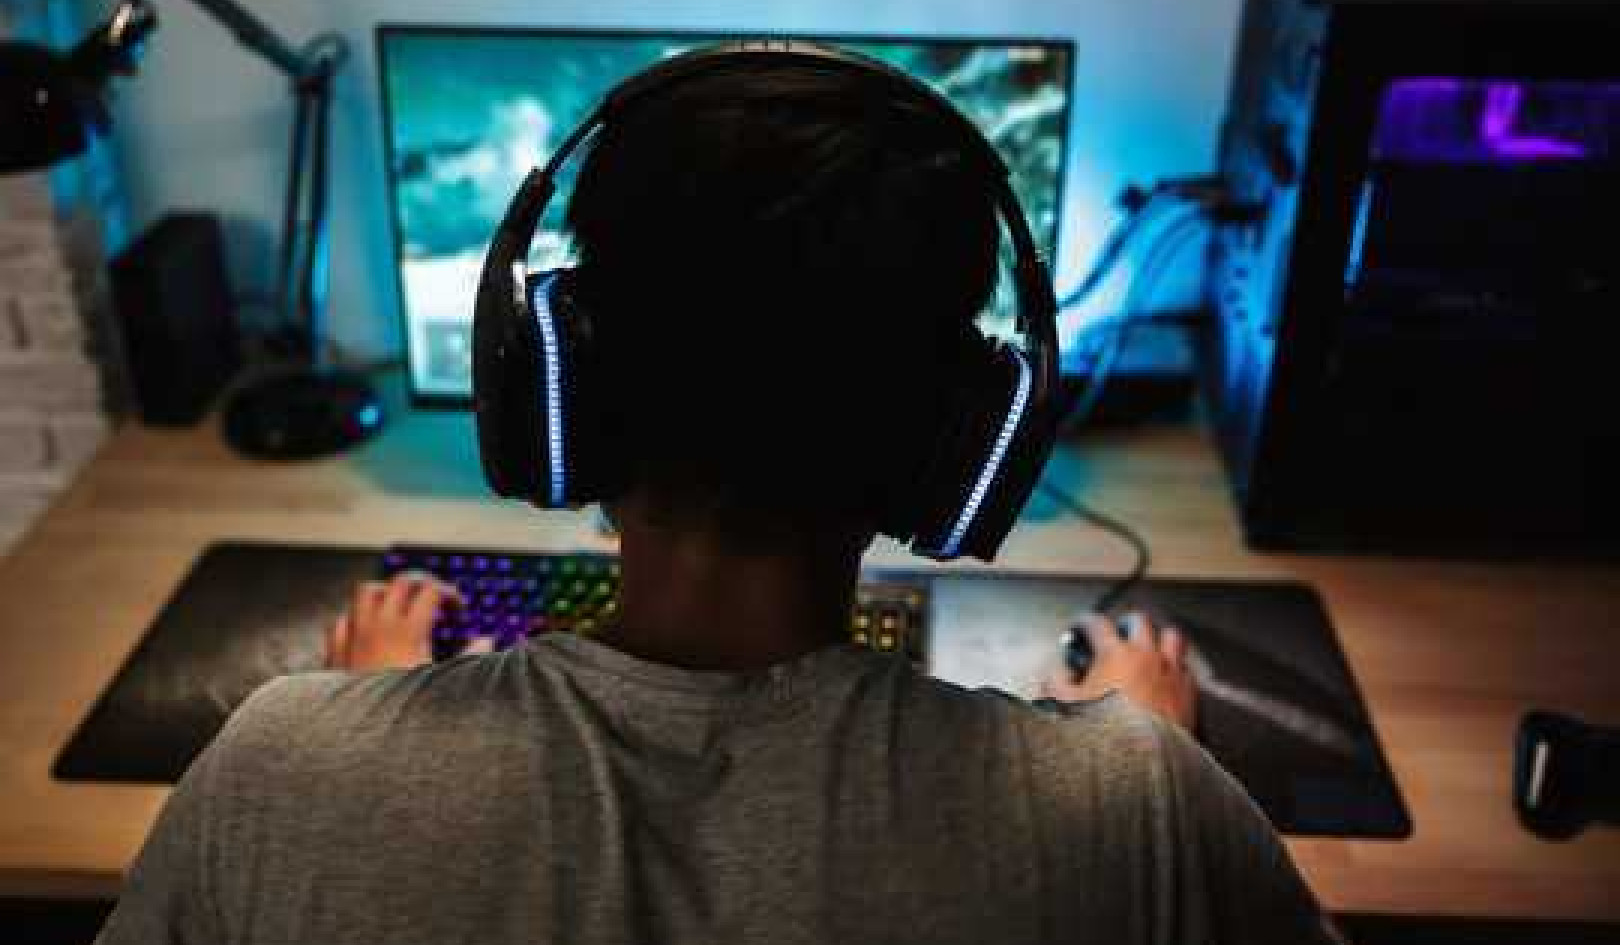 How Playing Video Games Can Ease Loneliness During The Coronavirus Pandemic